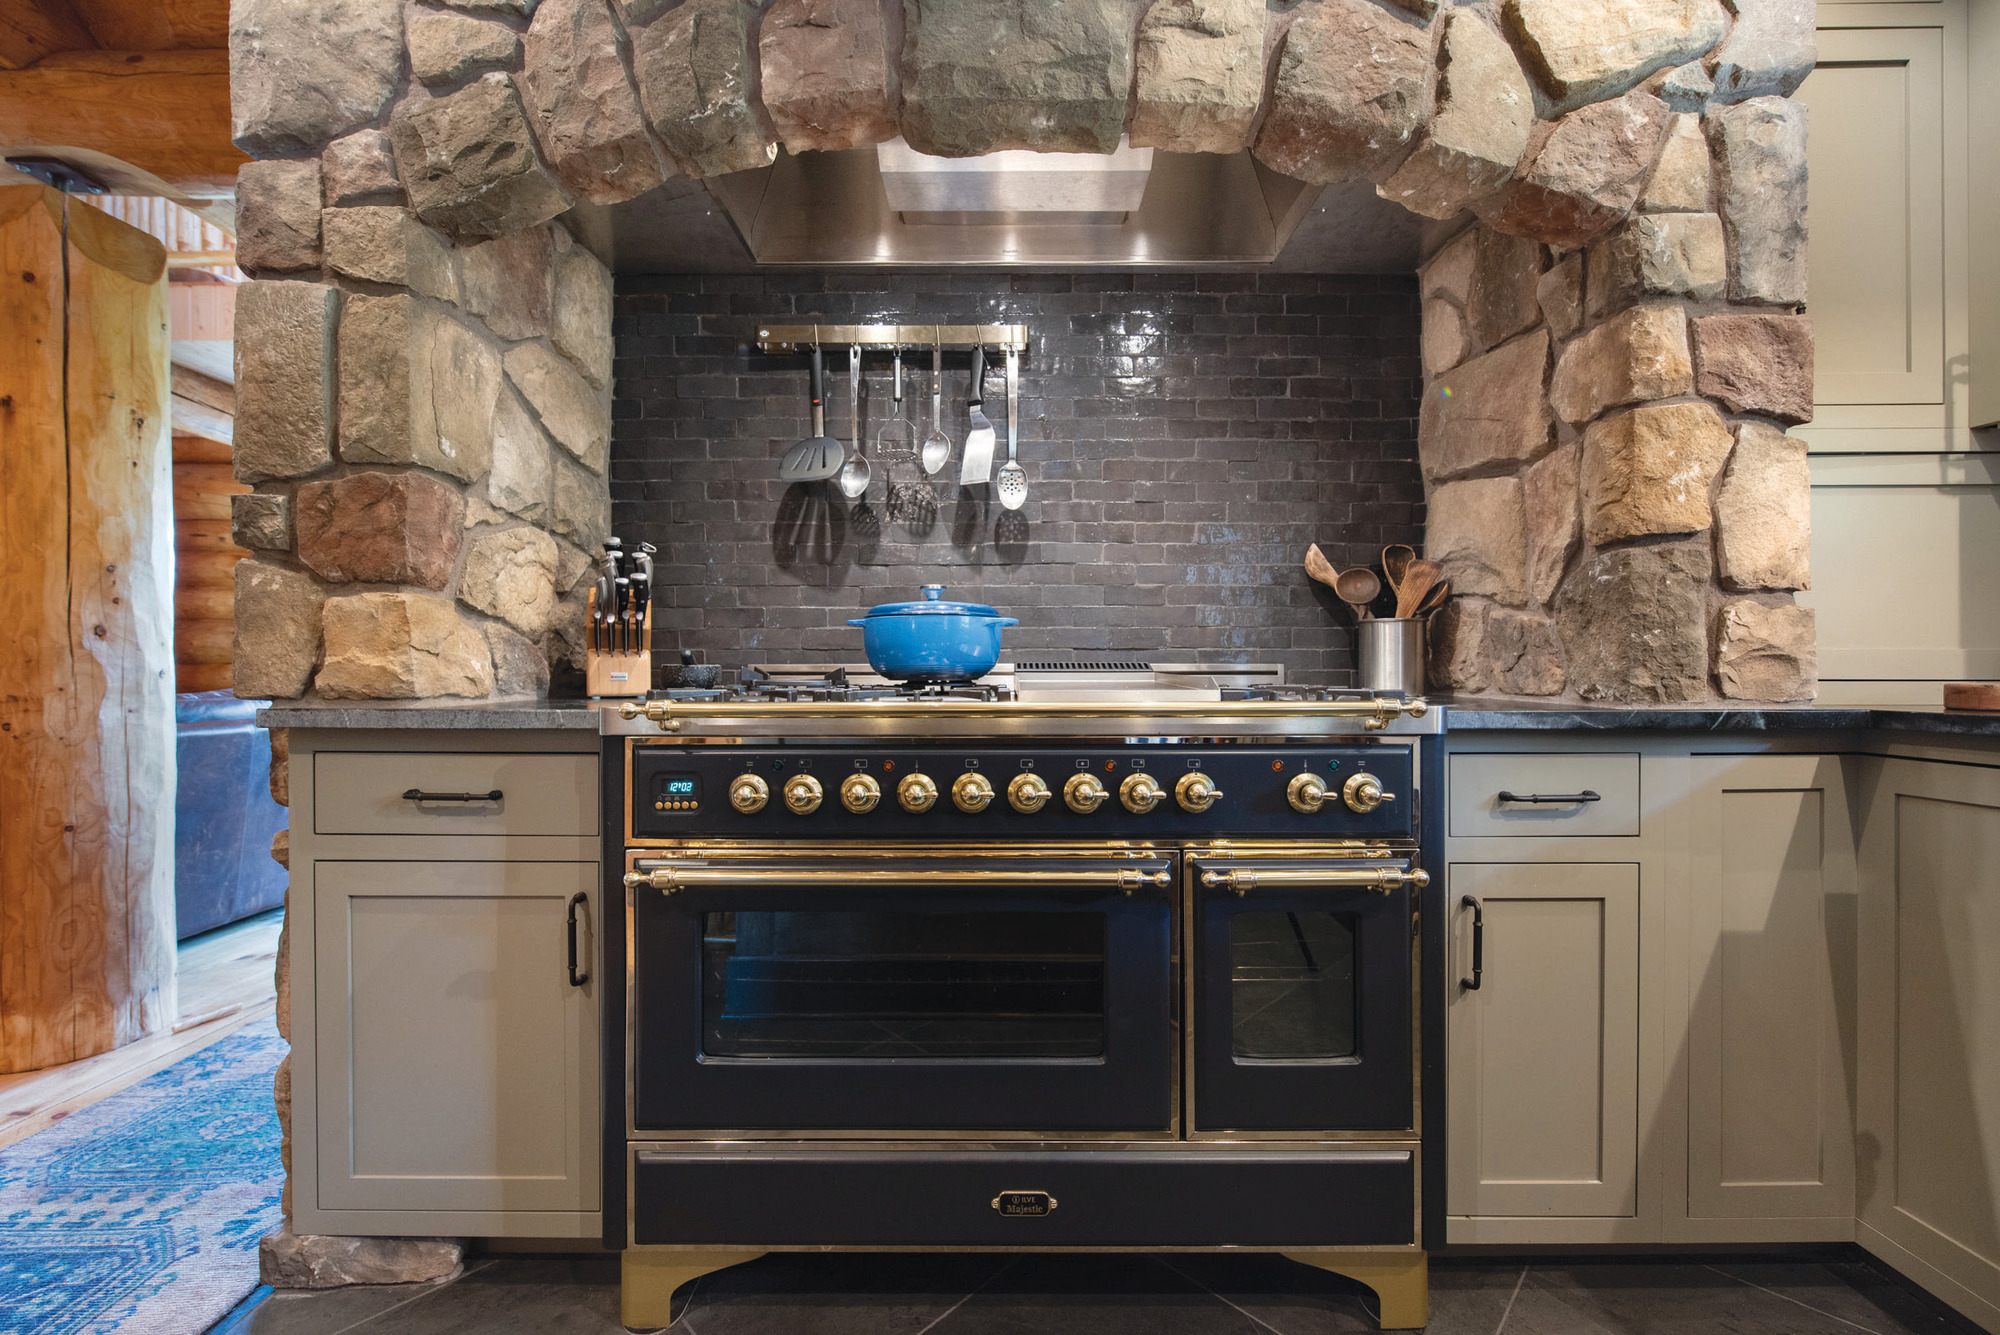 A handmade backsplash blends with the stone arch above a 48-inch, French-style range in this Spokane kitchen.